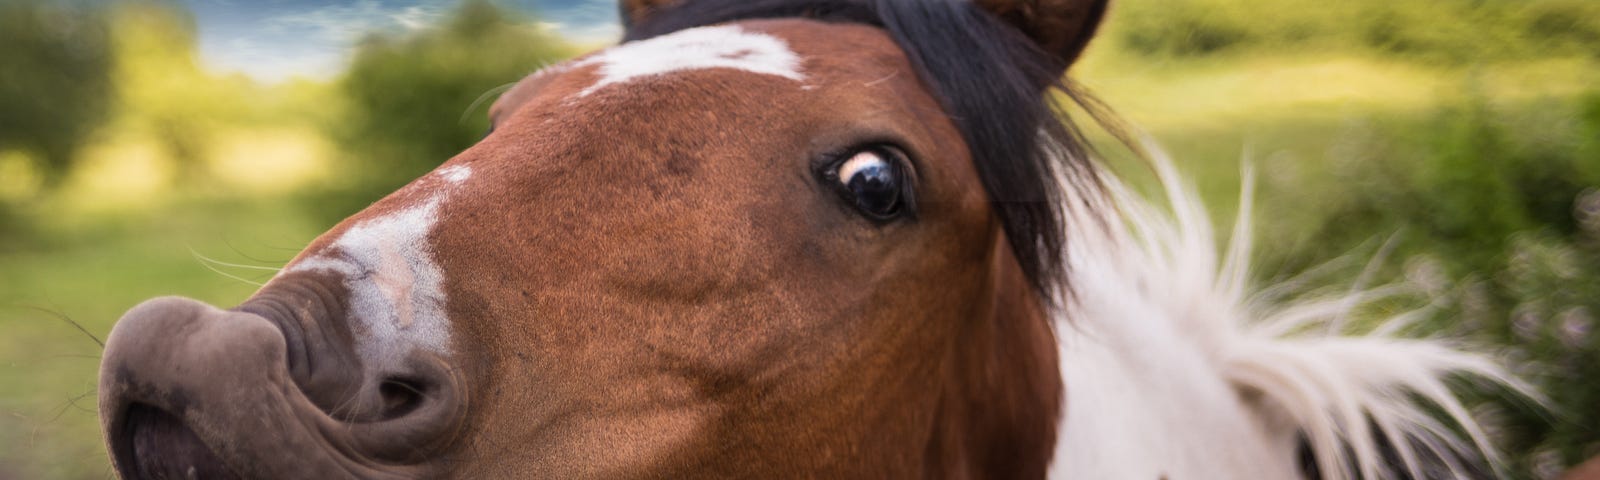 a horse curling its lips and baring its teeth